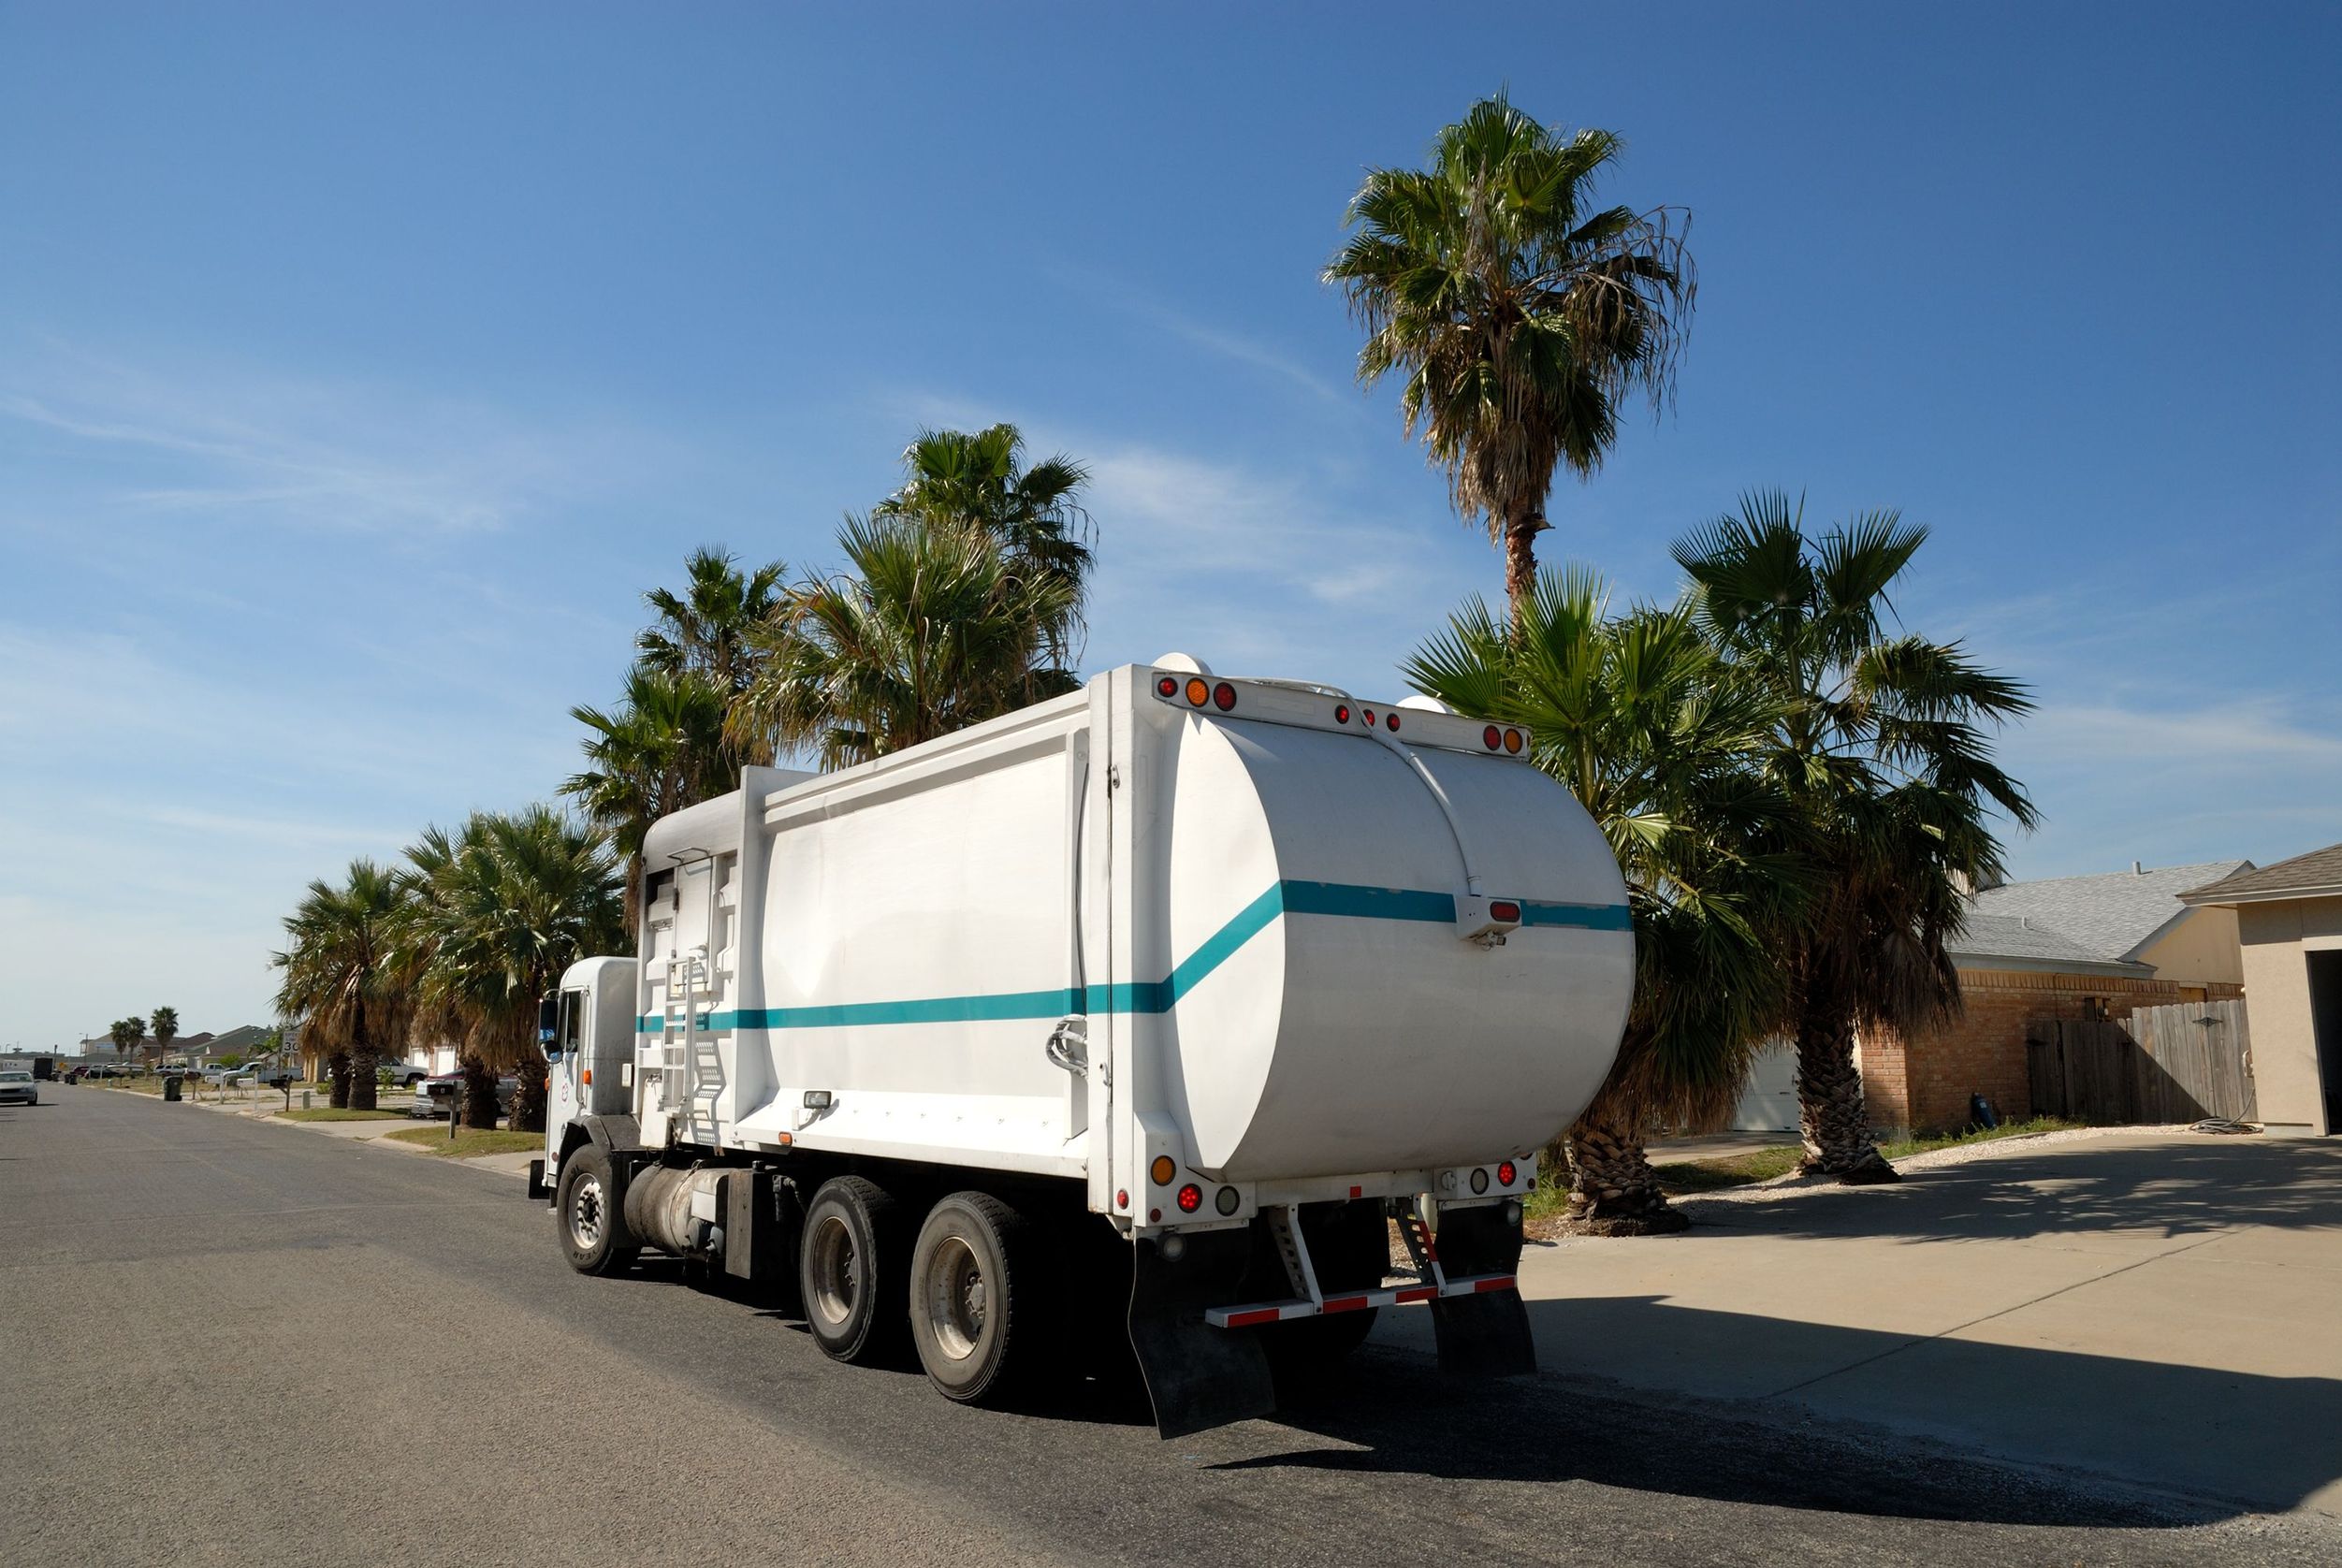 How to Choose Waste Management in Elk Grove, CA